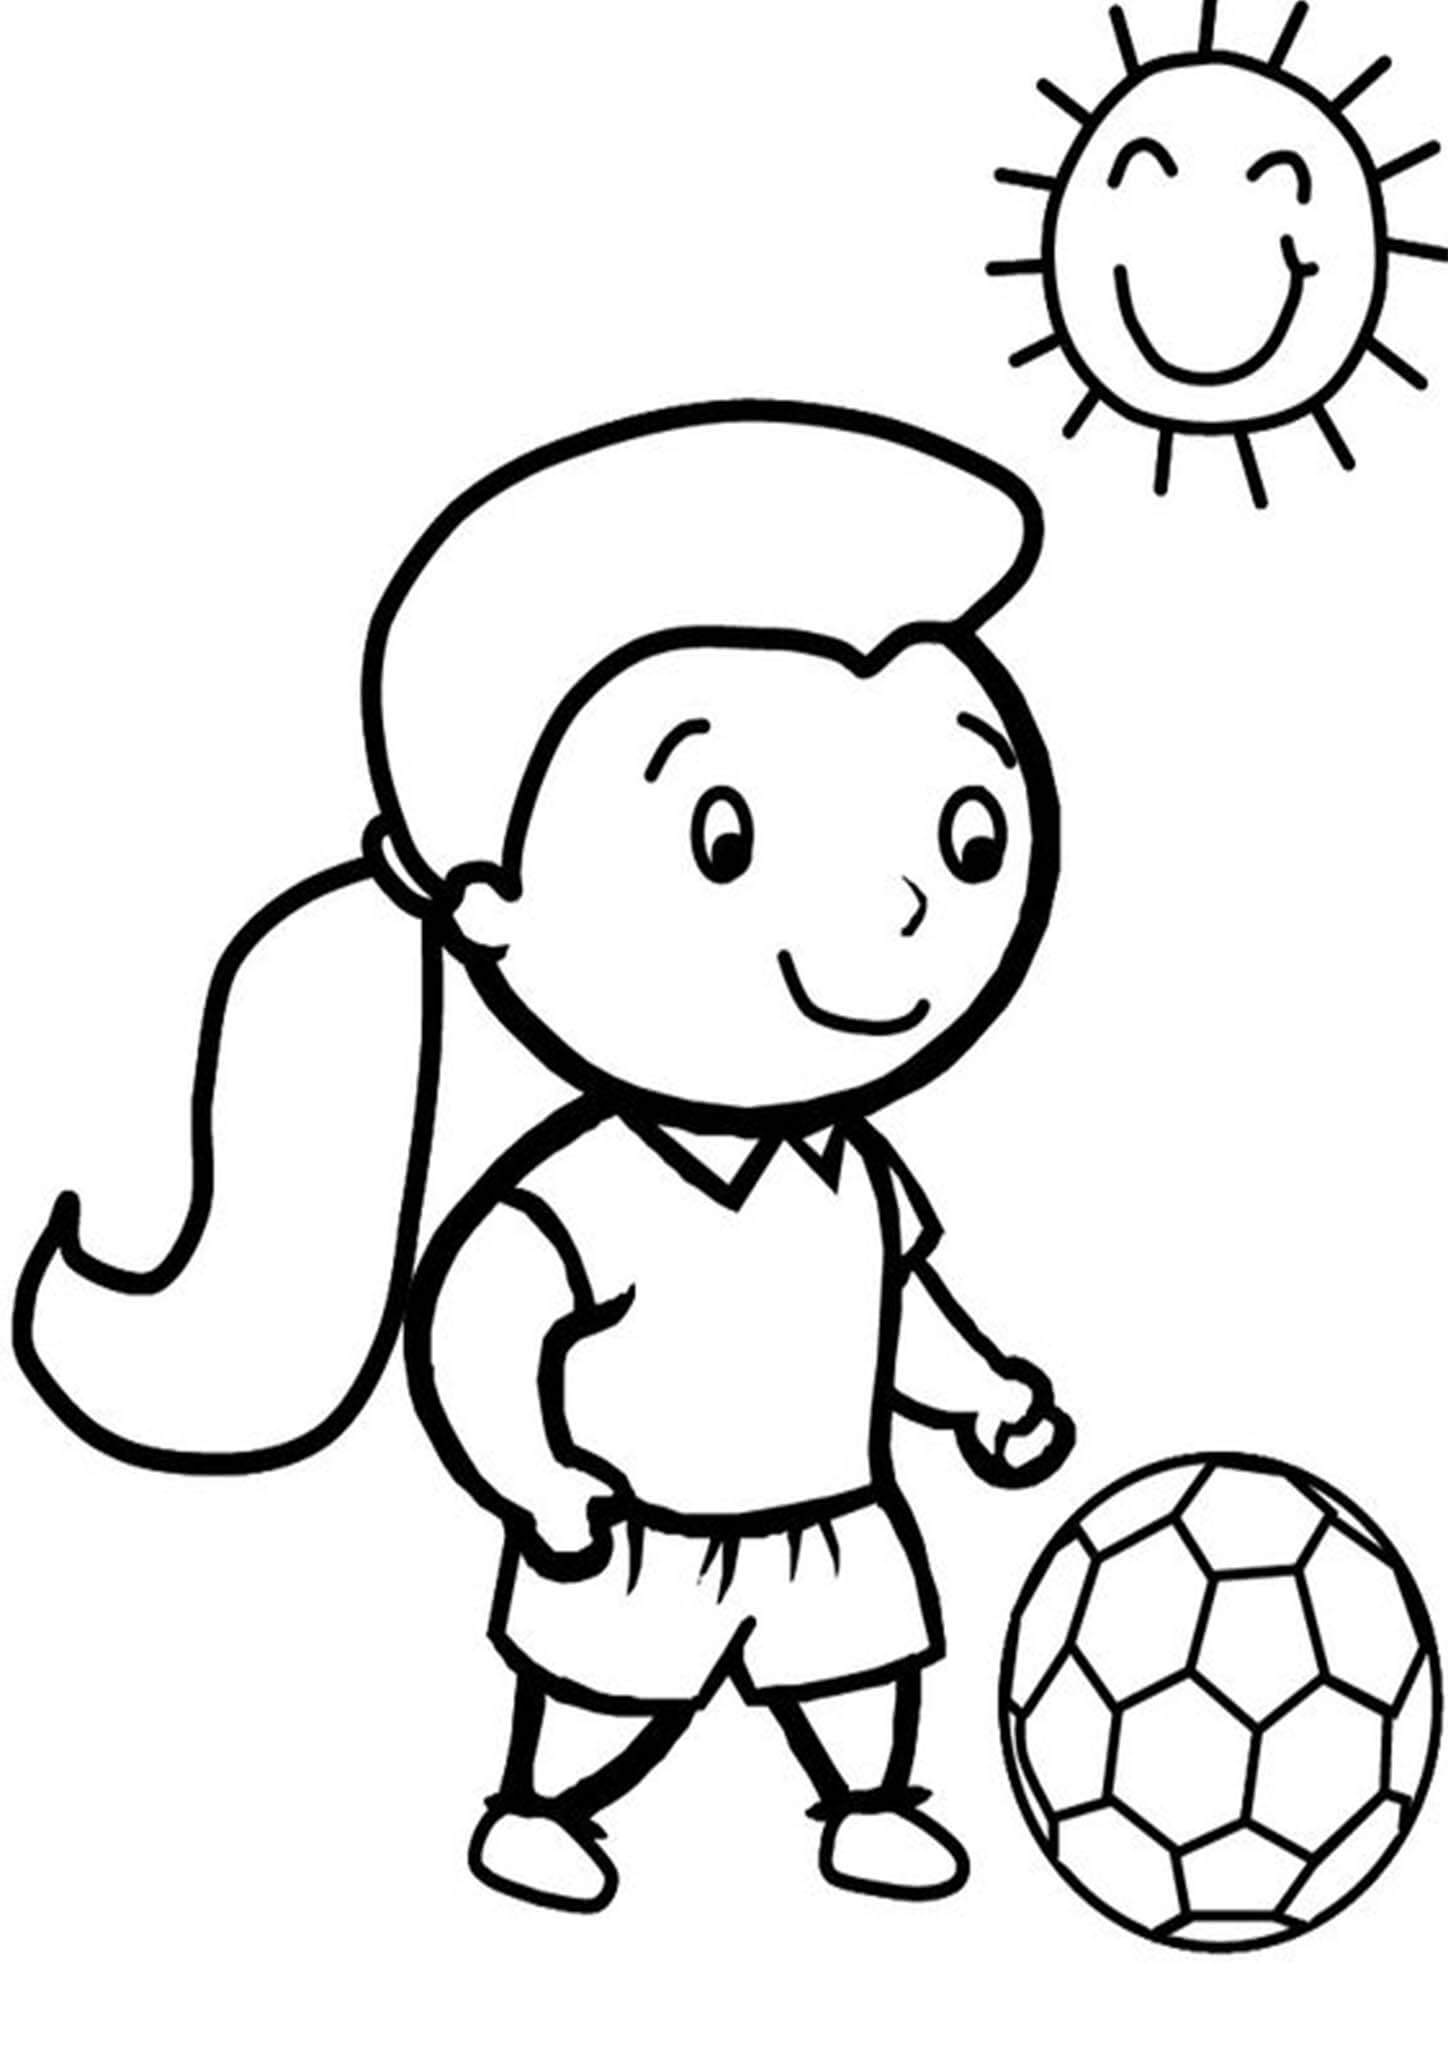 Free easy to print soccer coloring pages